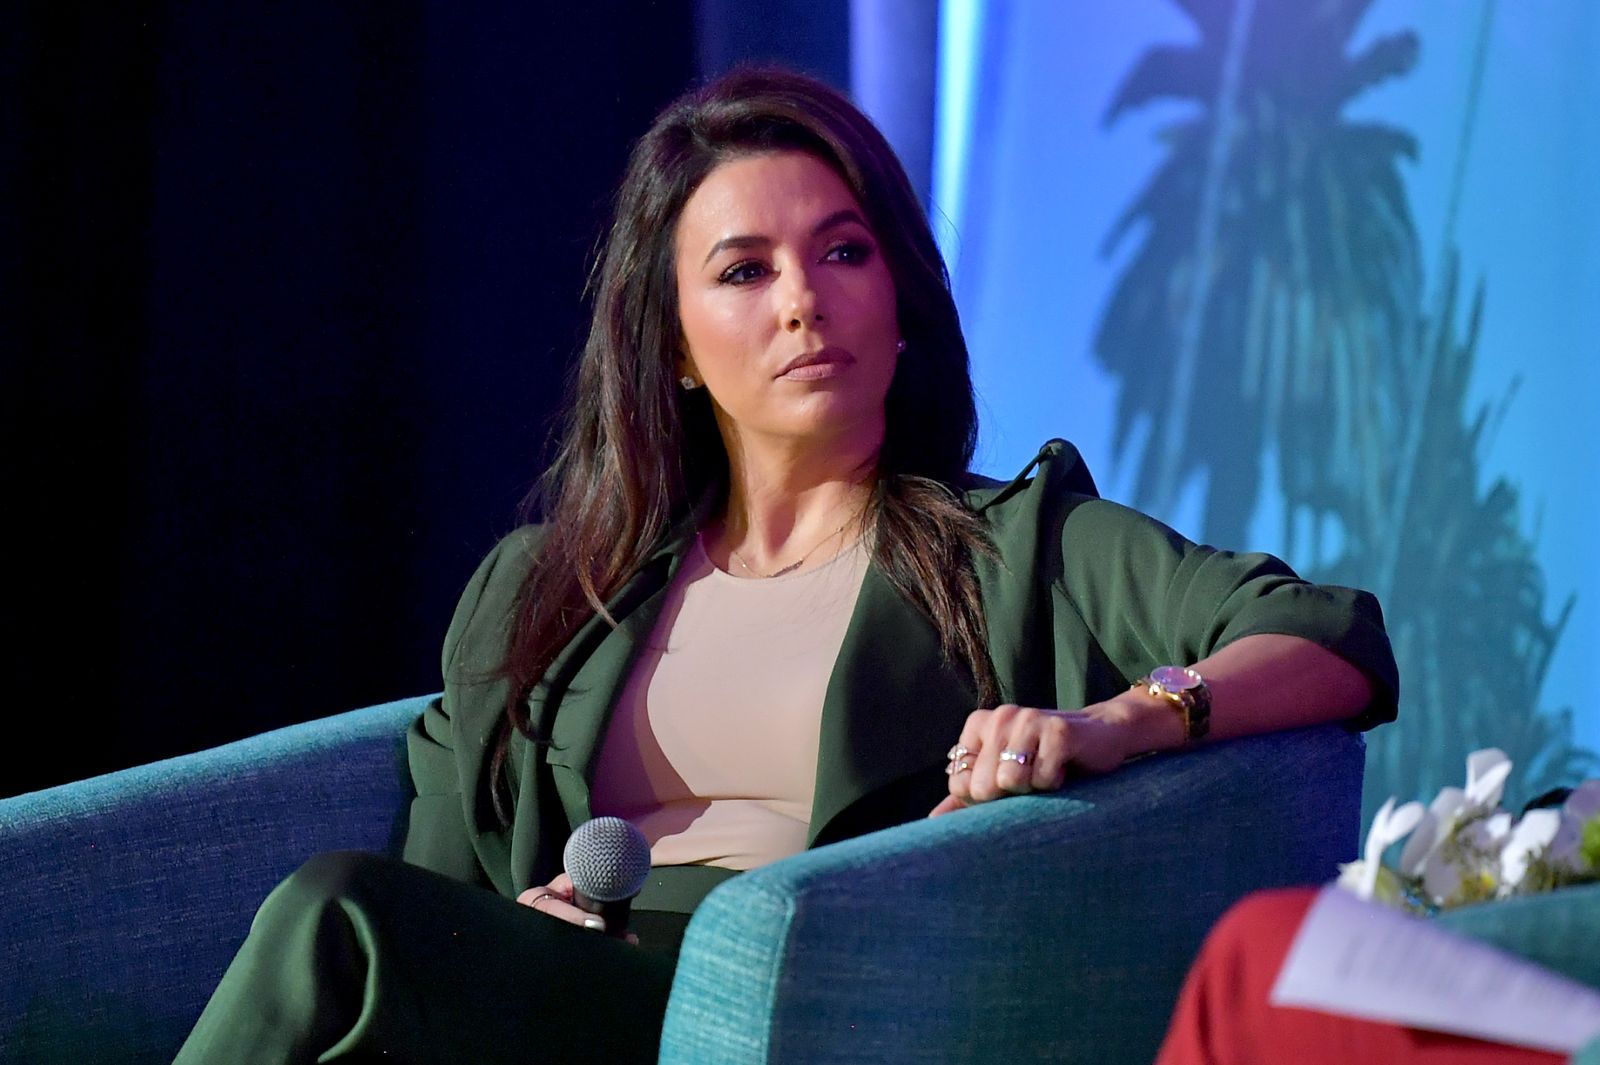 Eva Longoria onstage during the "Eva Longoria In Conversation" at AFI Fest on November 15, 2019, in Los Angeles, California | Photo: Emma McIntyre/Getty Images